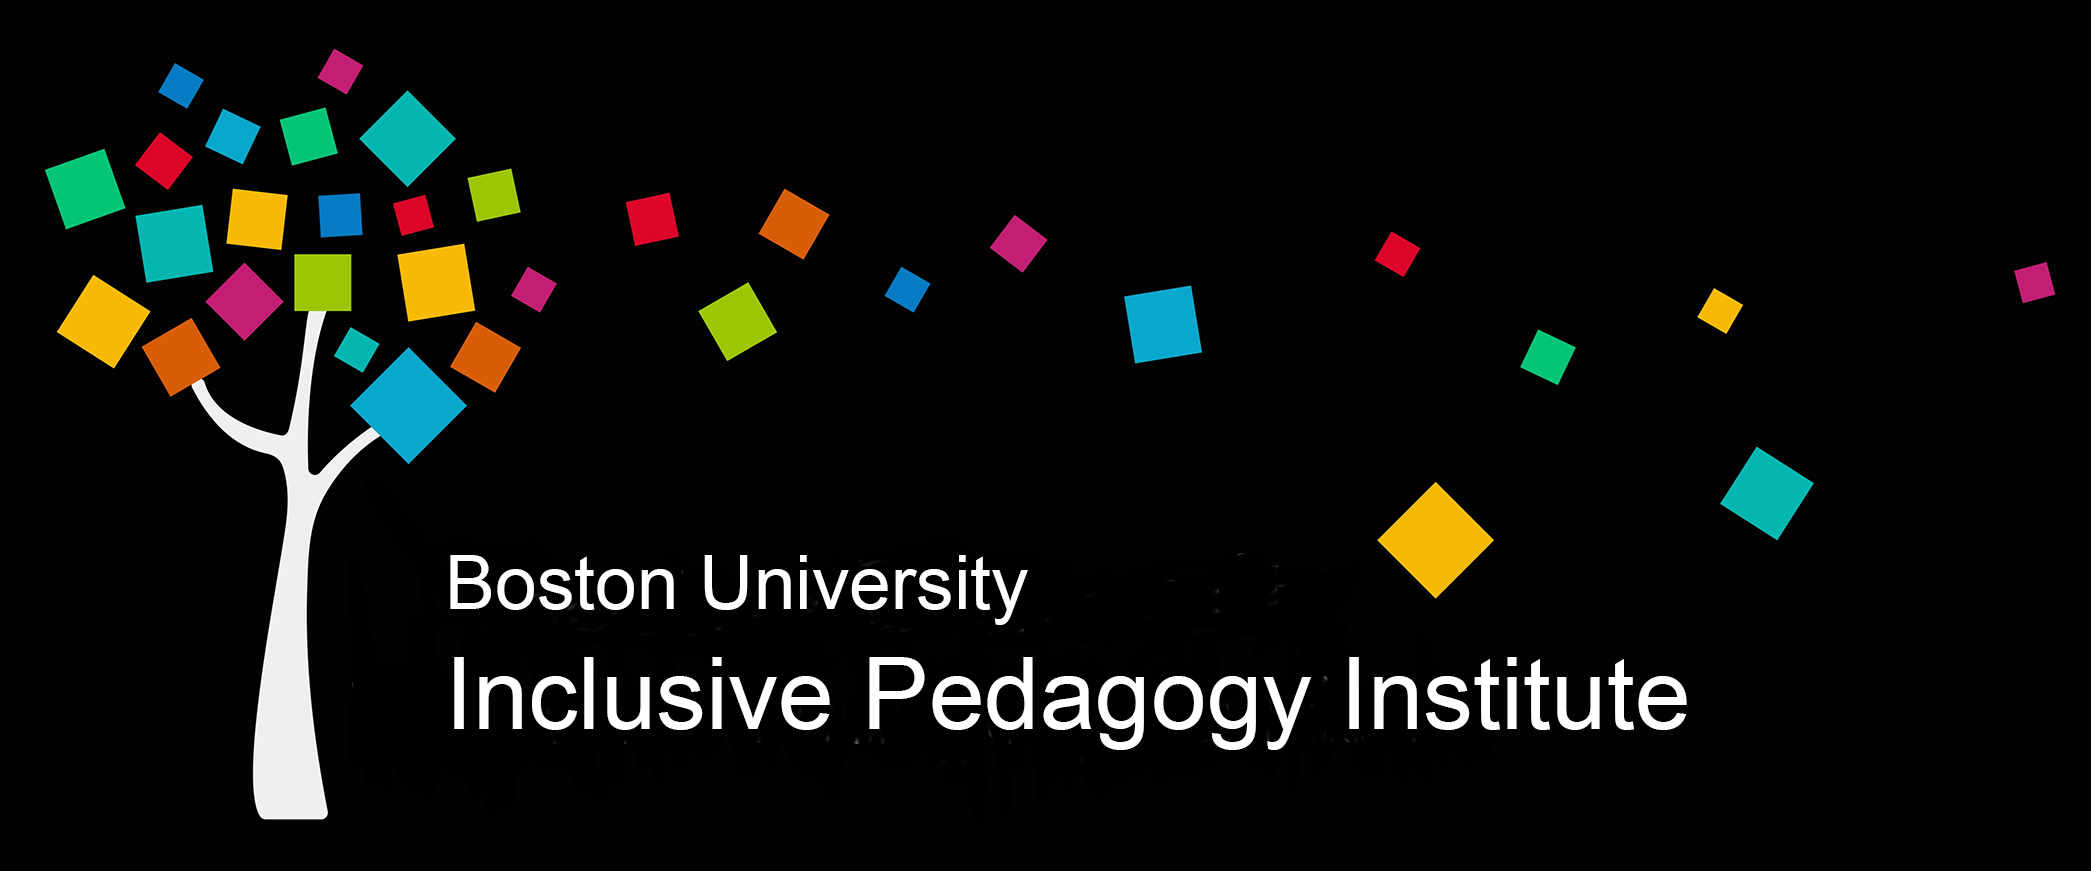 A white tree with different colored square leaves falling from it with the text "Boston University Inclusive Pedagogy Initiative written in the bottom left.